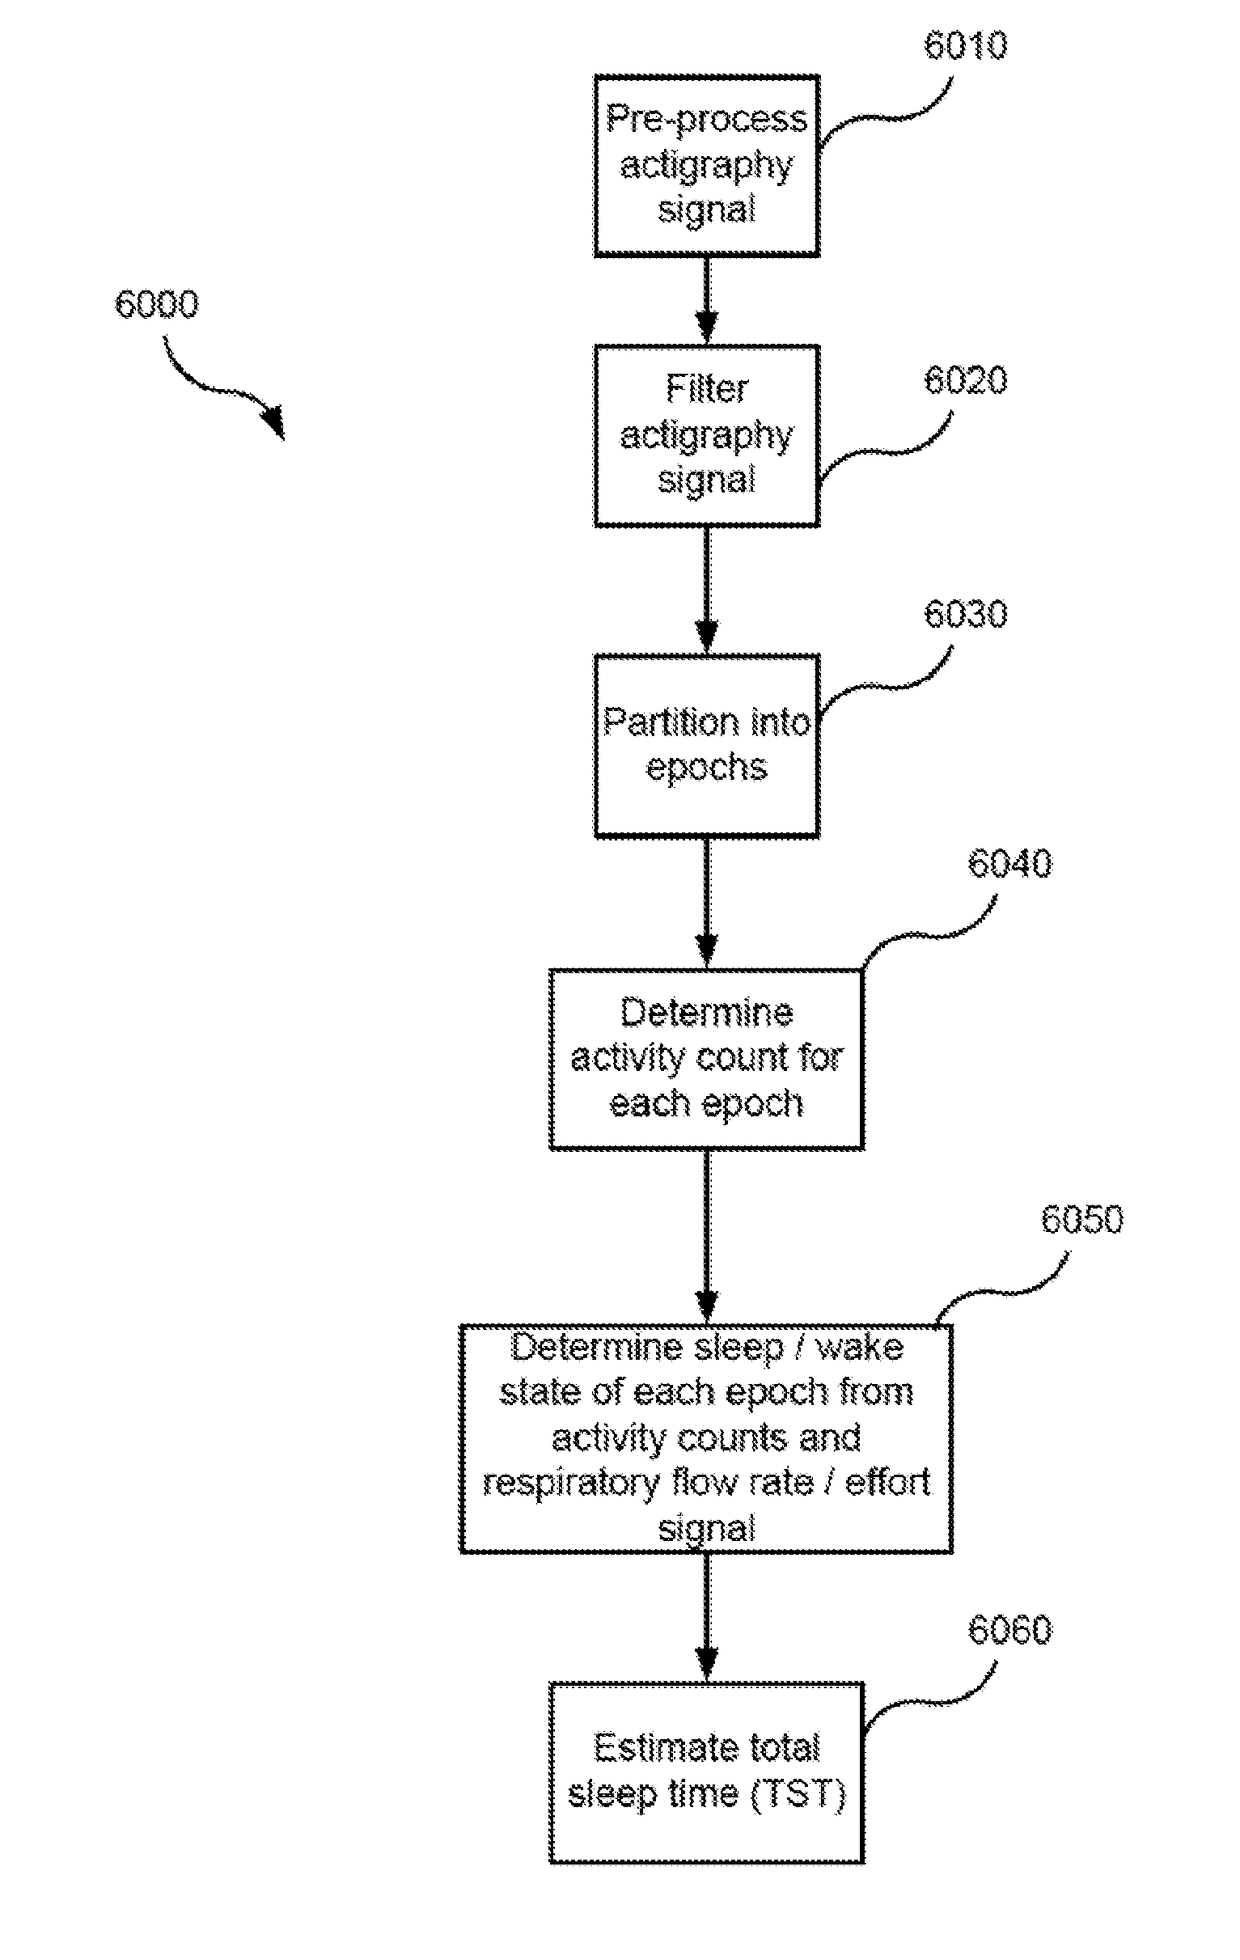 Systems and methods for screening, diagnosis and monitoring sleep-disordered breathing